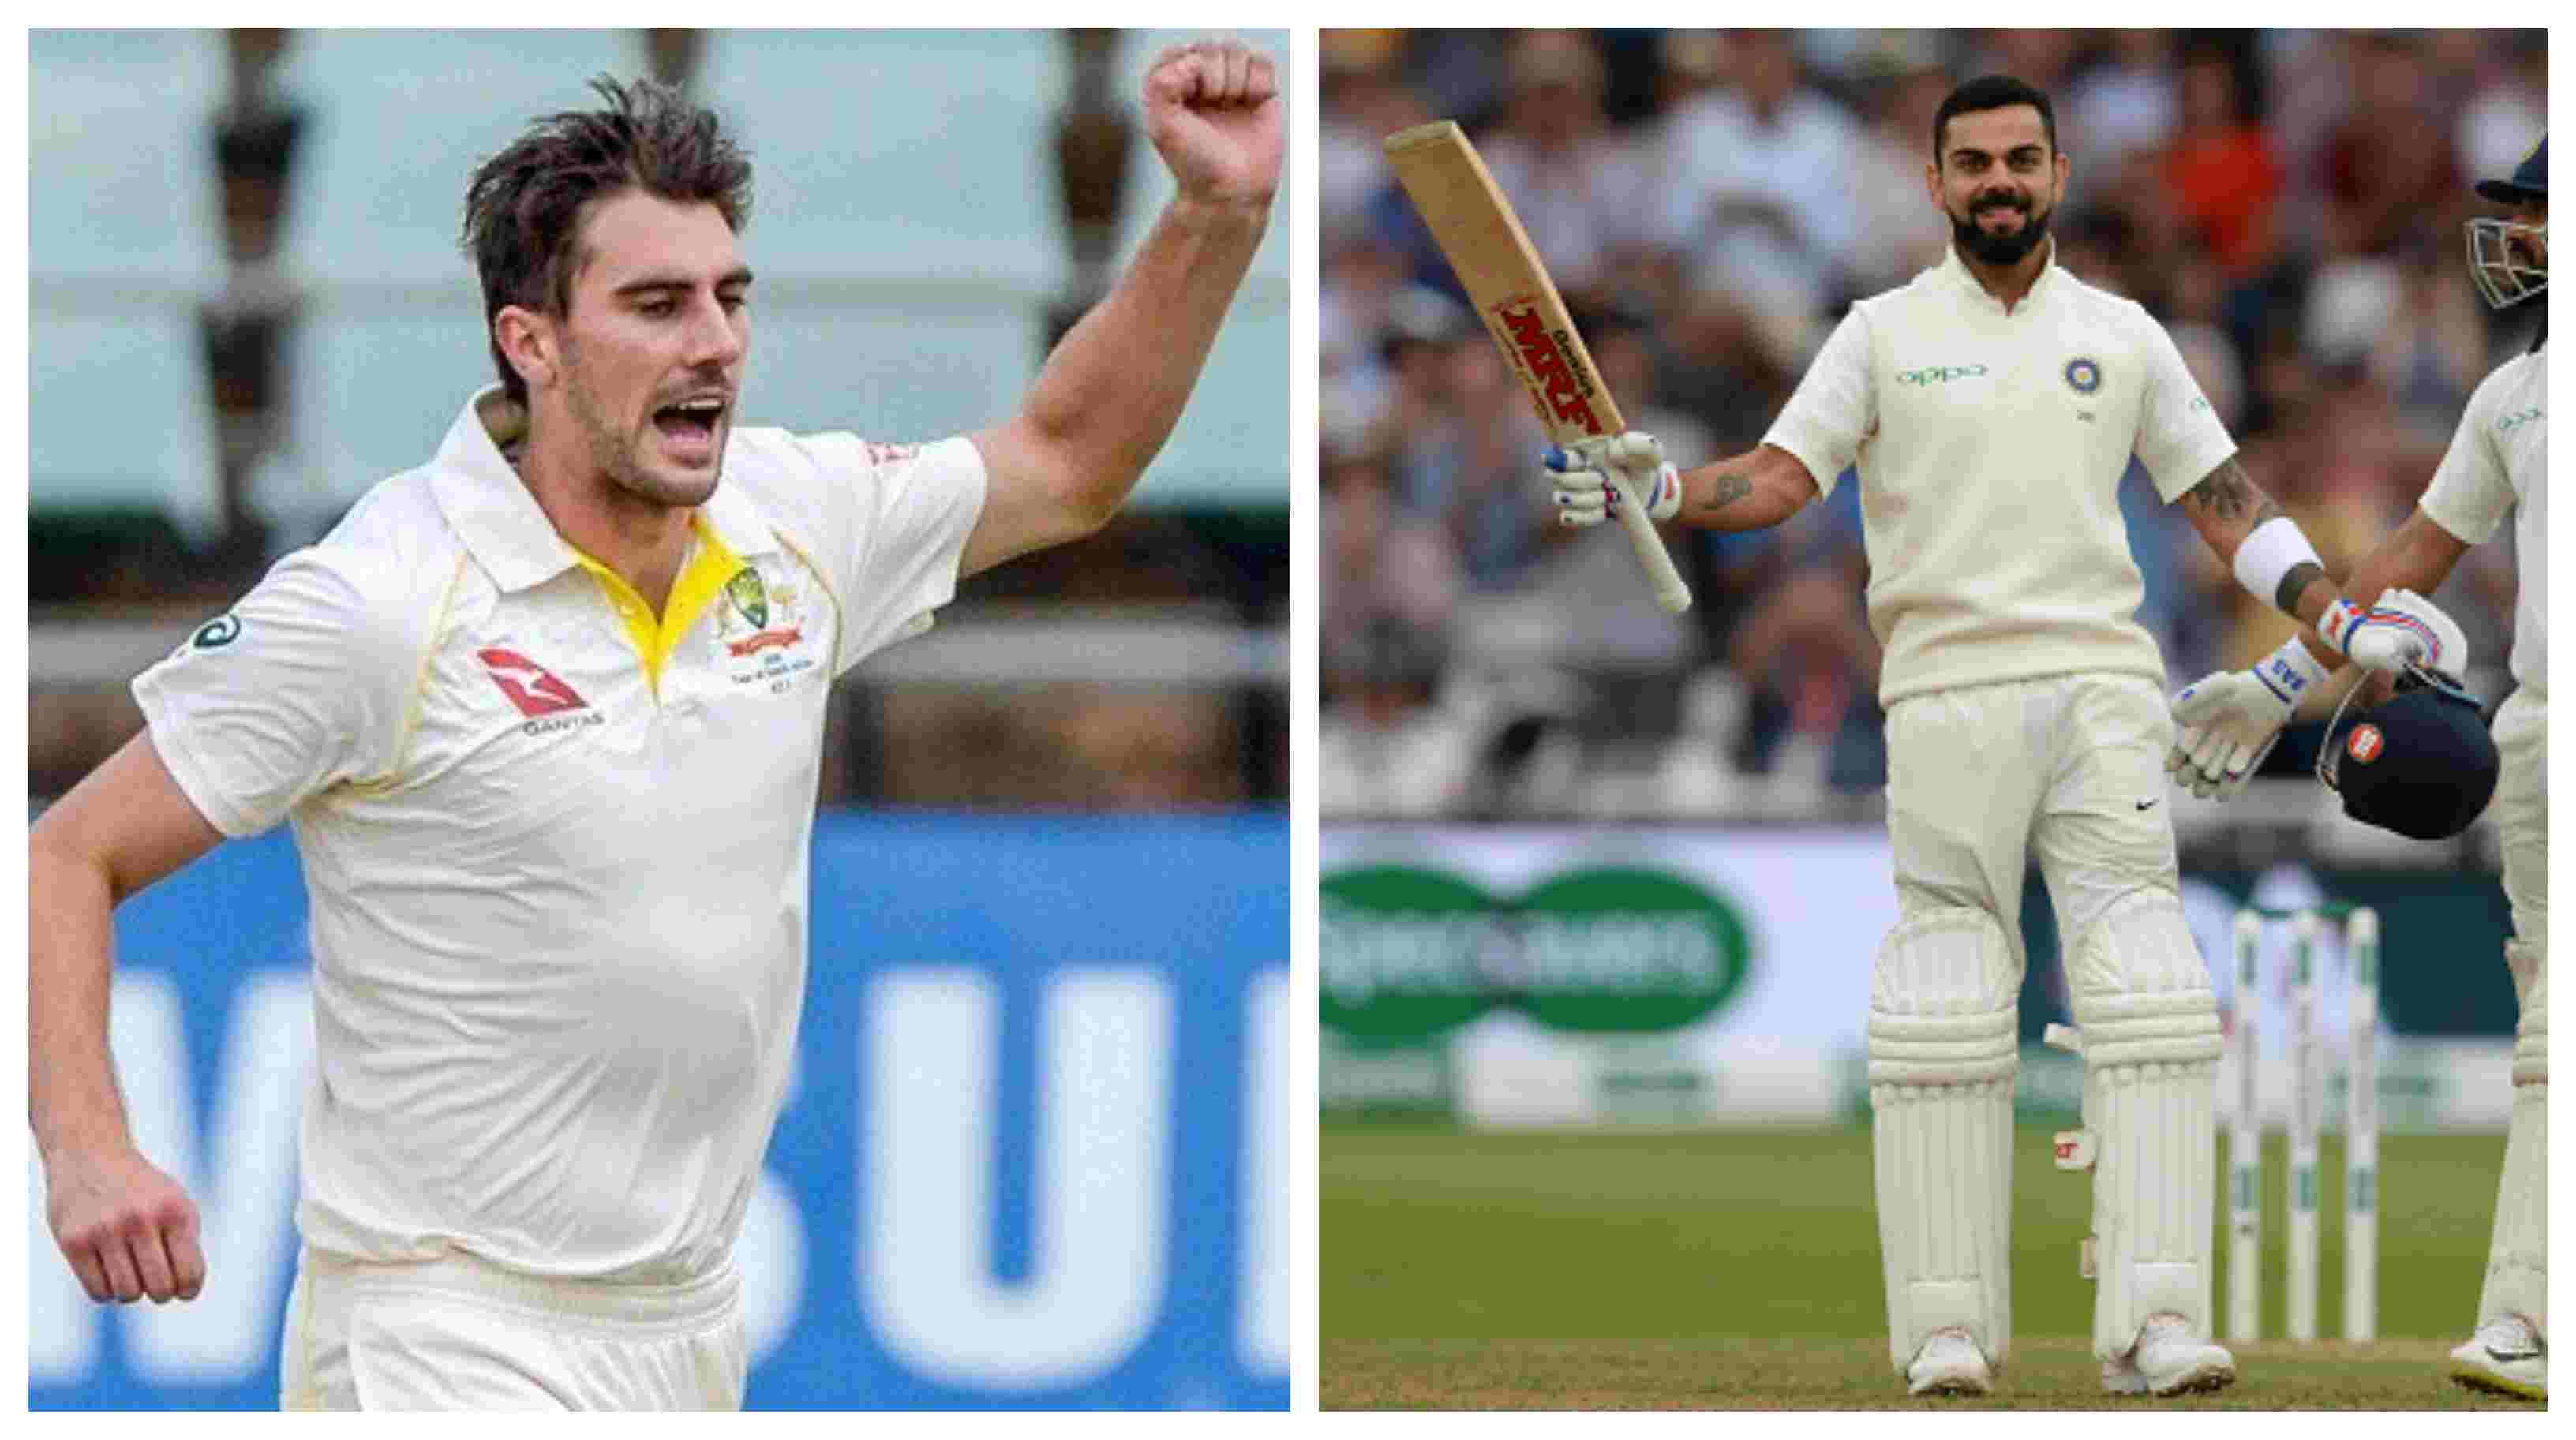 Cricket fans are eager to see the duel between Cummins and Kohli in the upcoming Test series 